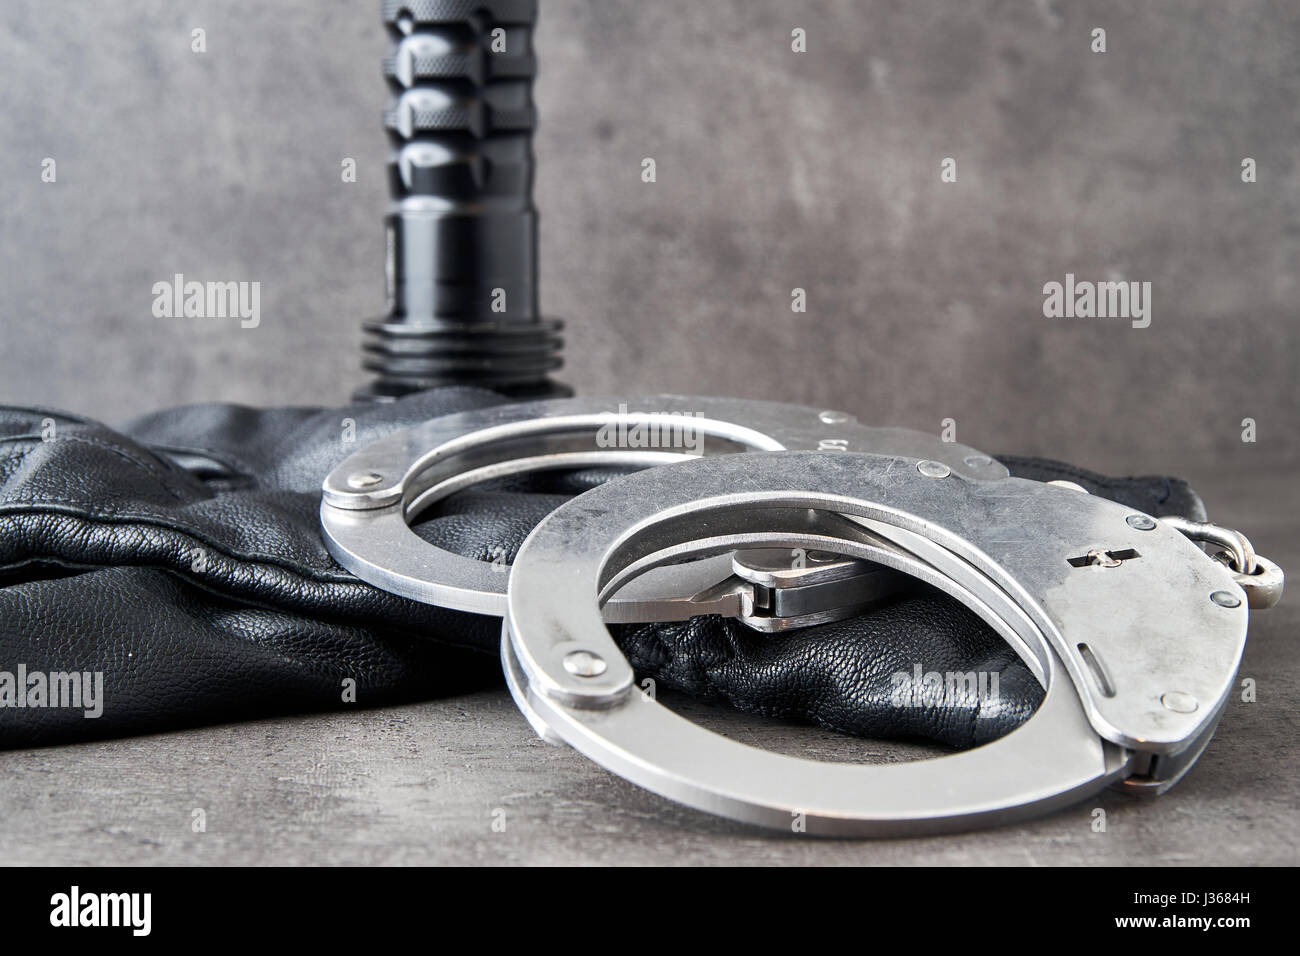 German police handcuffs, leather gloves and a torchlight on rough grey background with copy space. Stock Photo